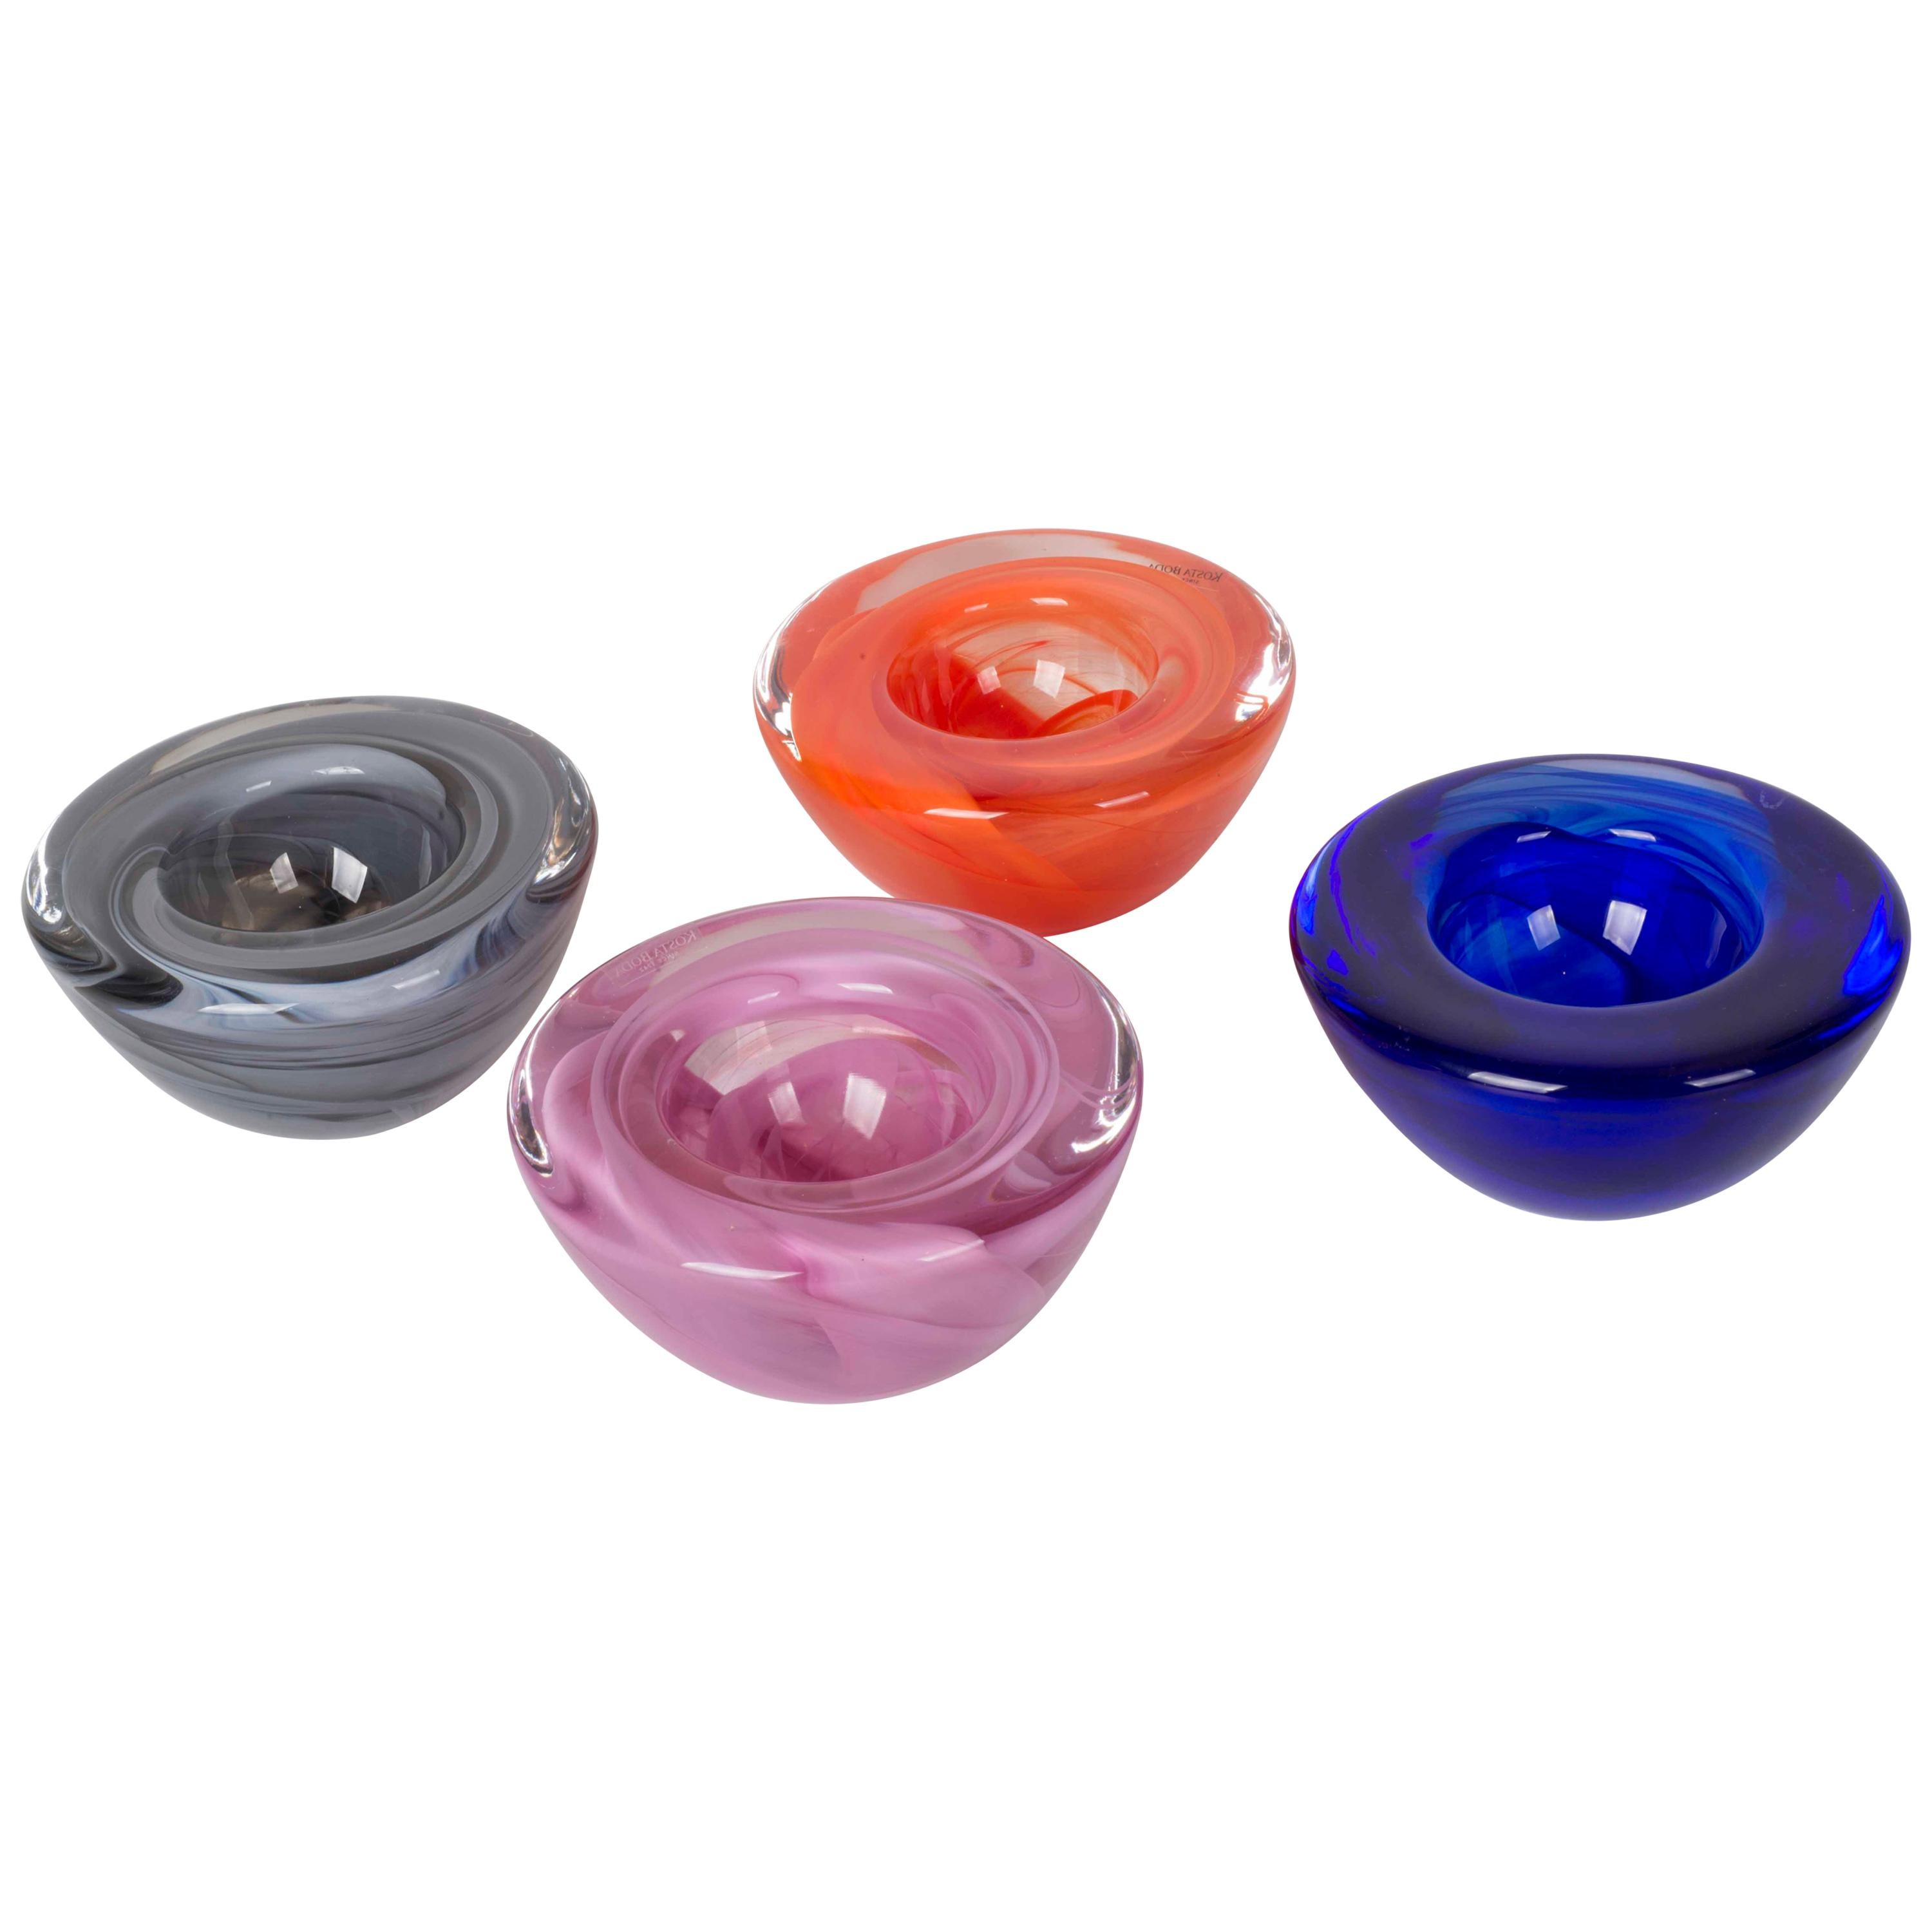 Kota Boda Small Bowls in Different Colors For Sale